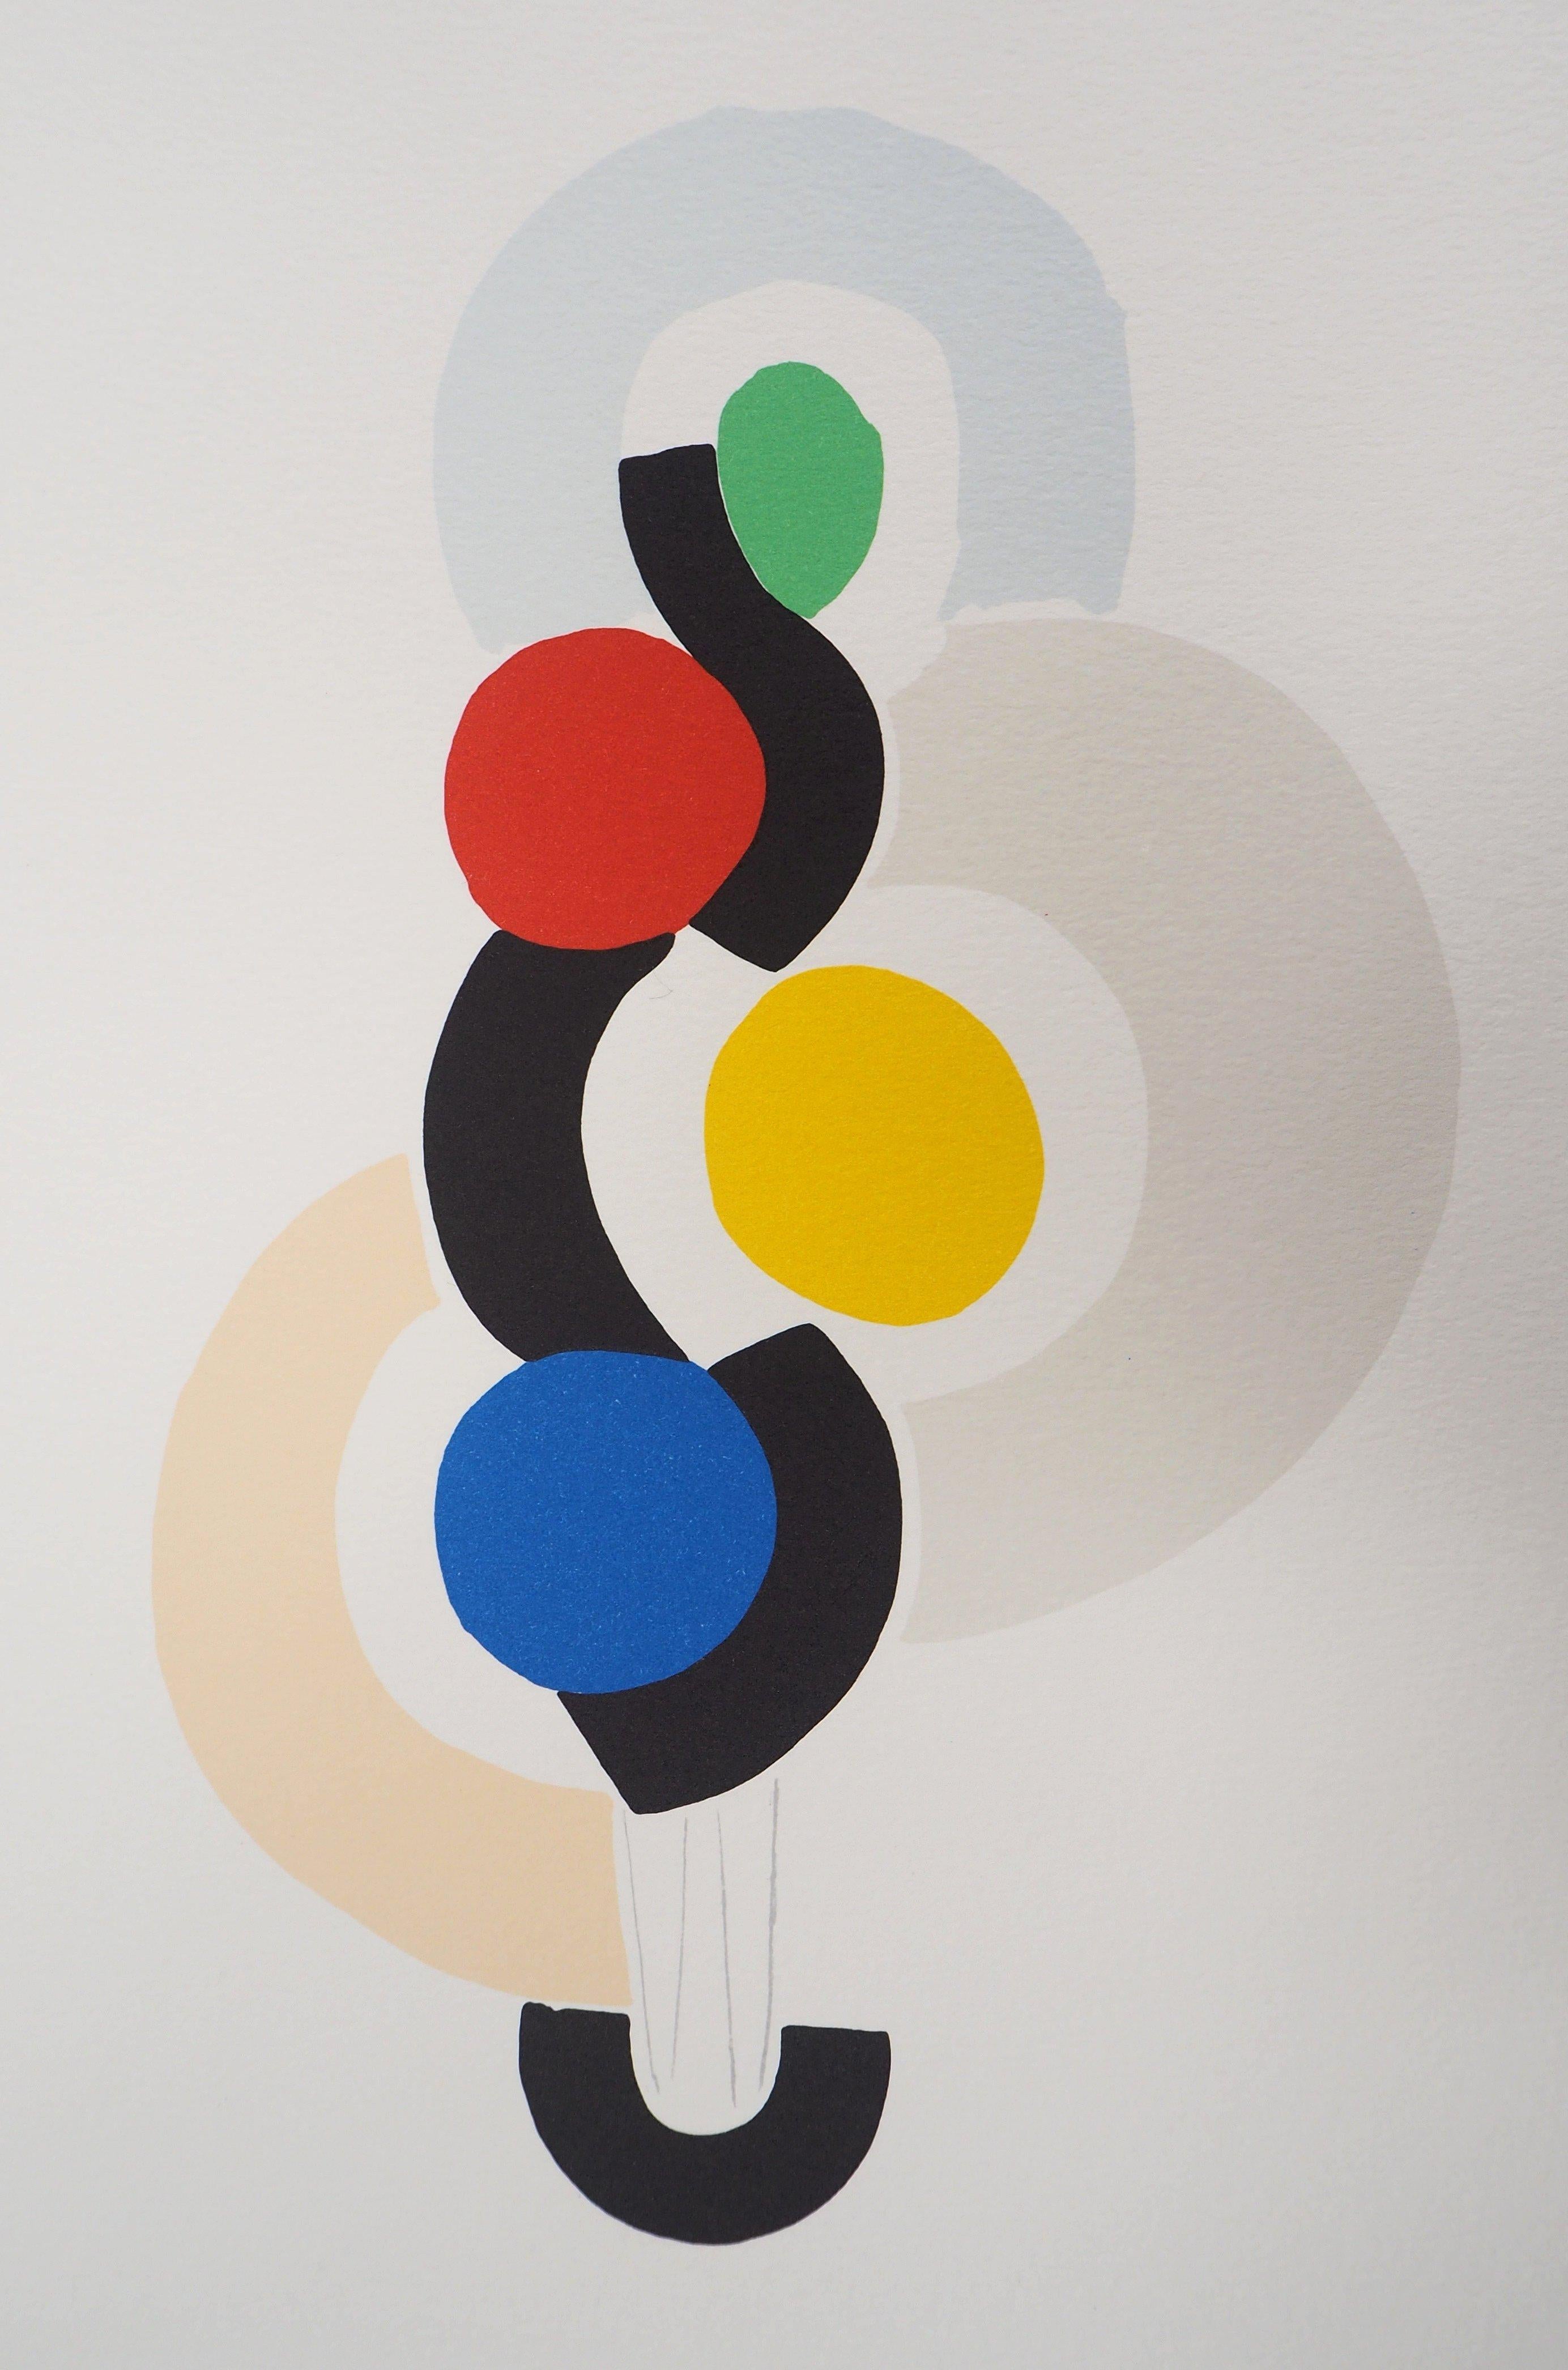 Sonia DELAUNAY
Rythm and Dance

Lithograph after a painting
Printed signature in the plate
Numbered /600 
On vellum paper 40 x 30 cm (c. 15.7 x 11.8 in)
ArtCurial edition, 1994

Excellent condition